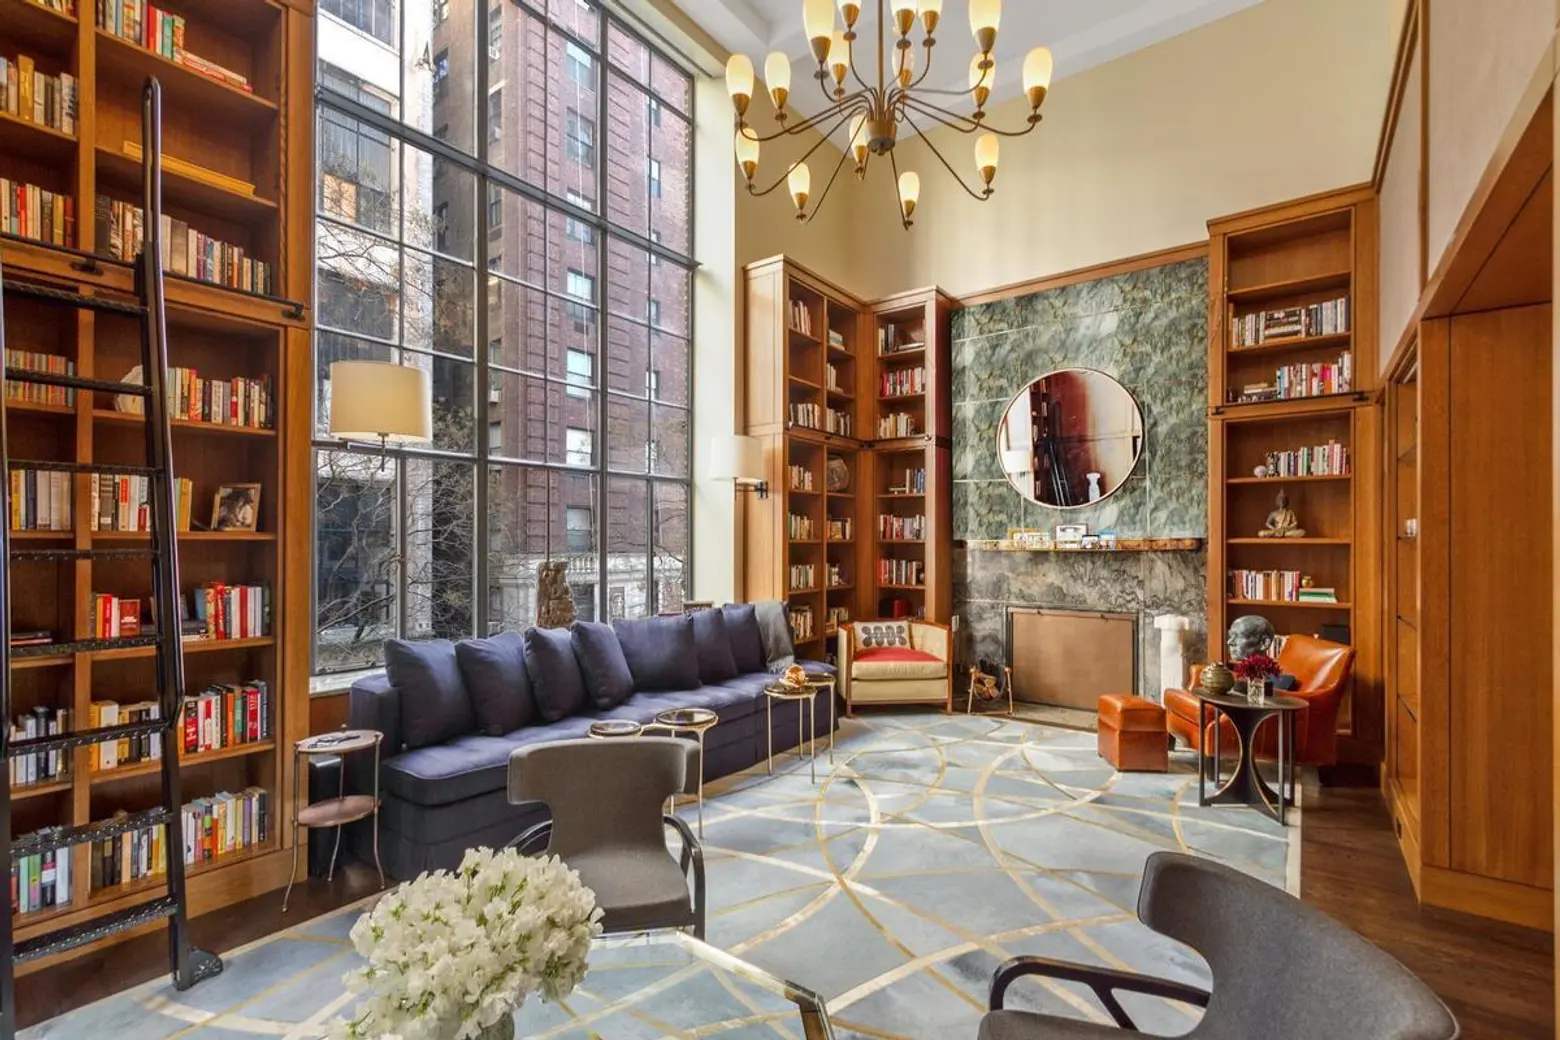 For $4M, a former Upper West Side sculptor’s studio is now an art-filled haven